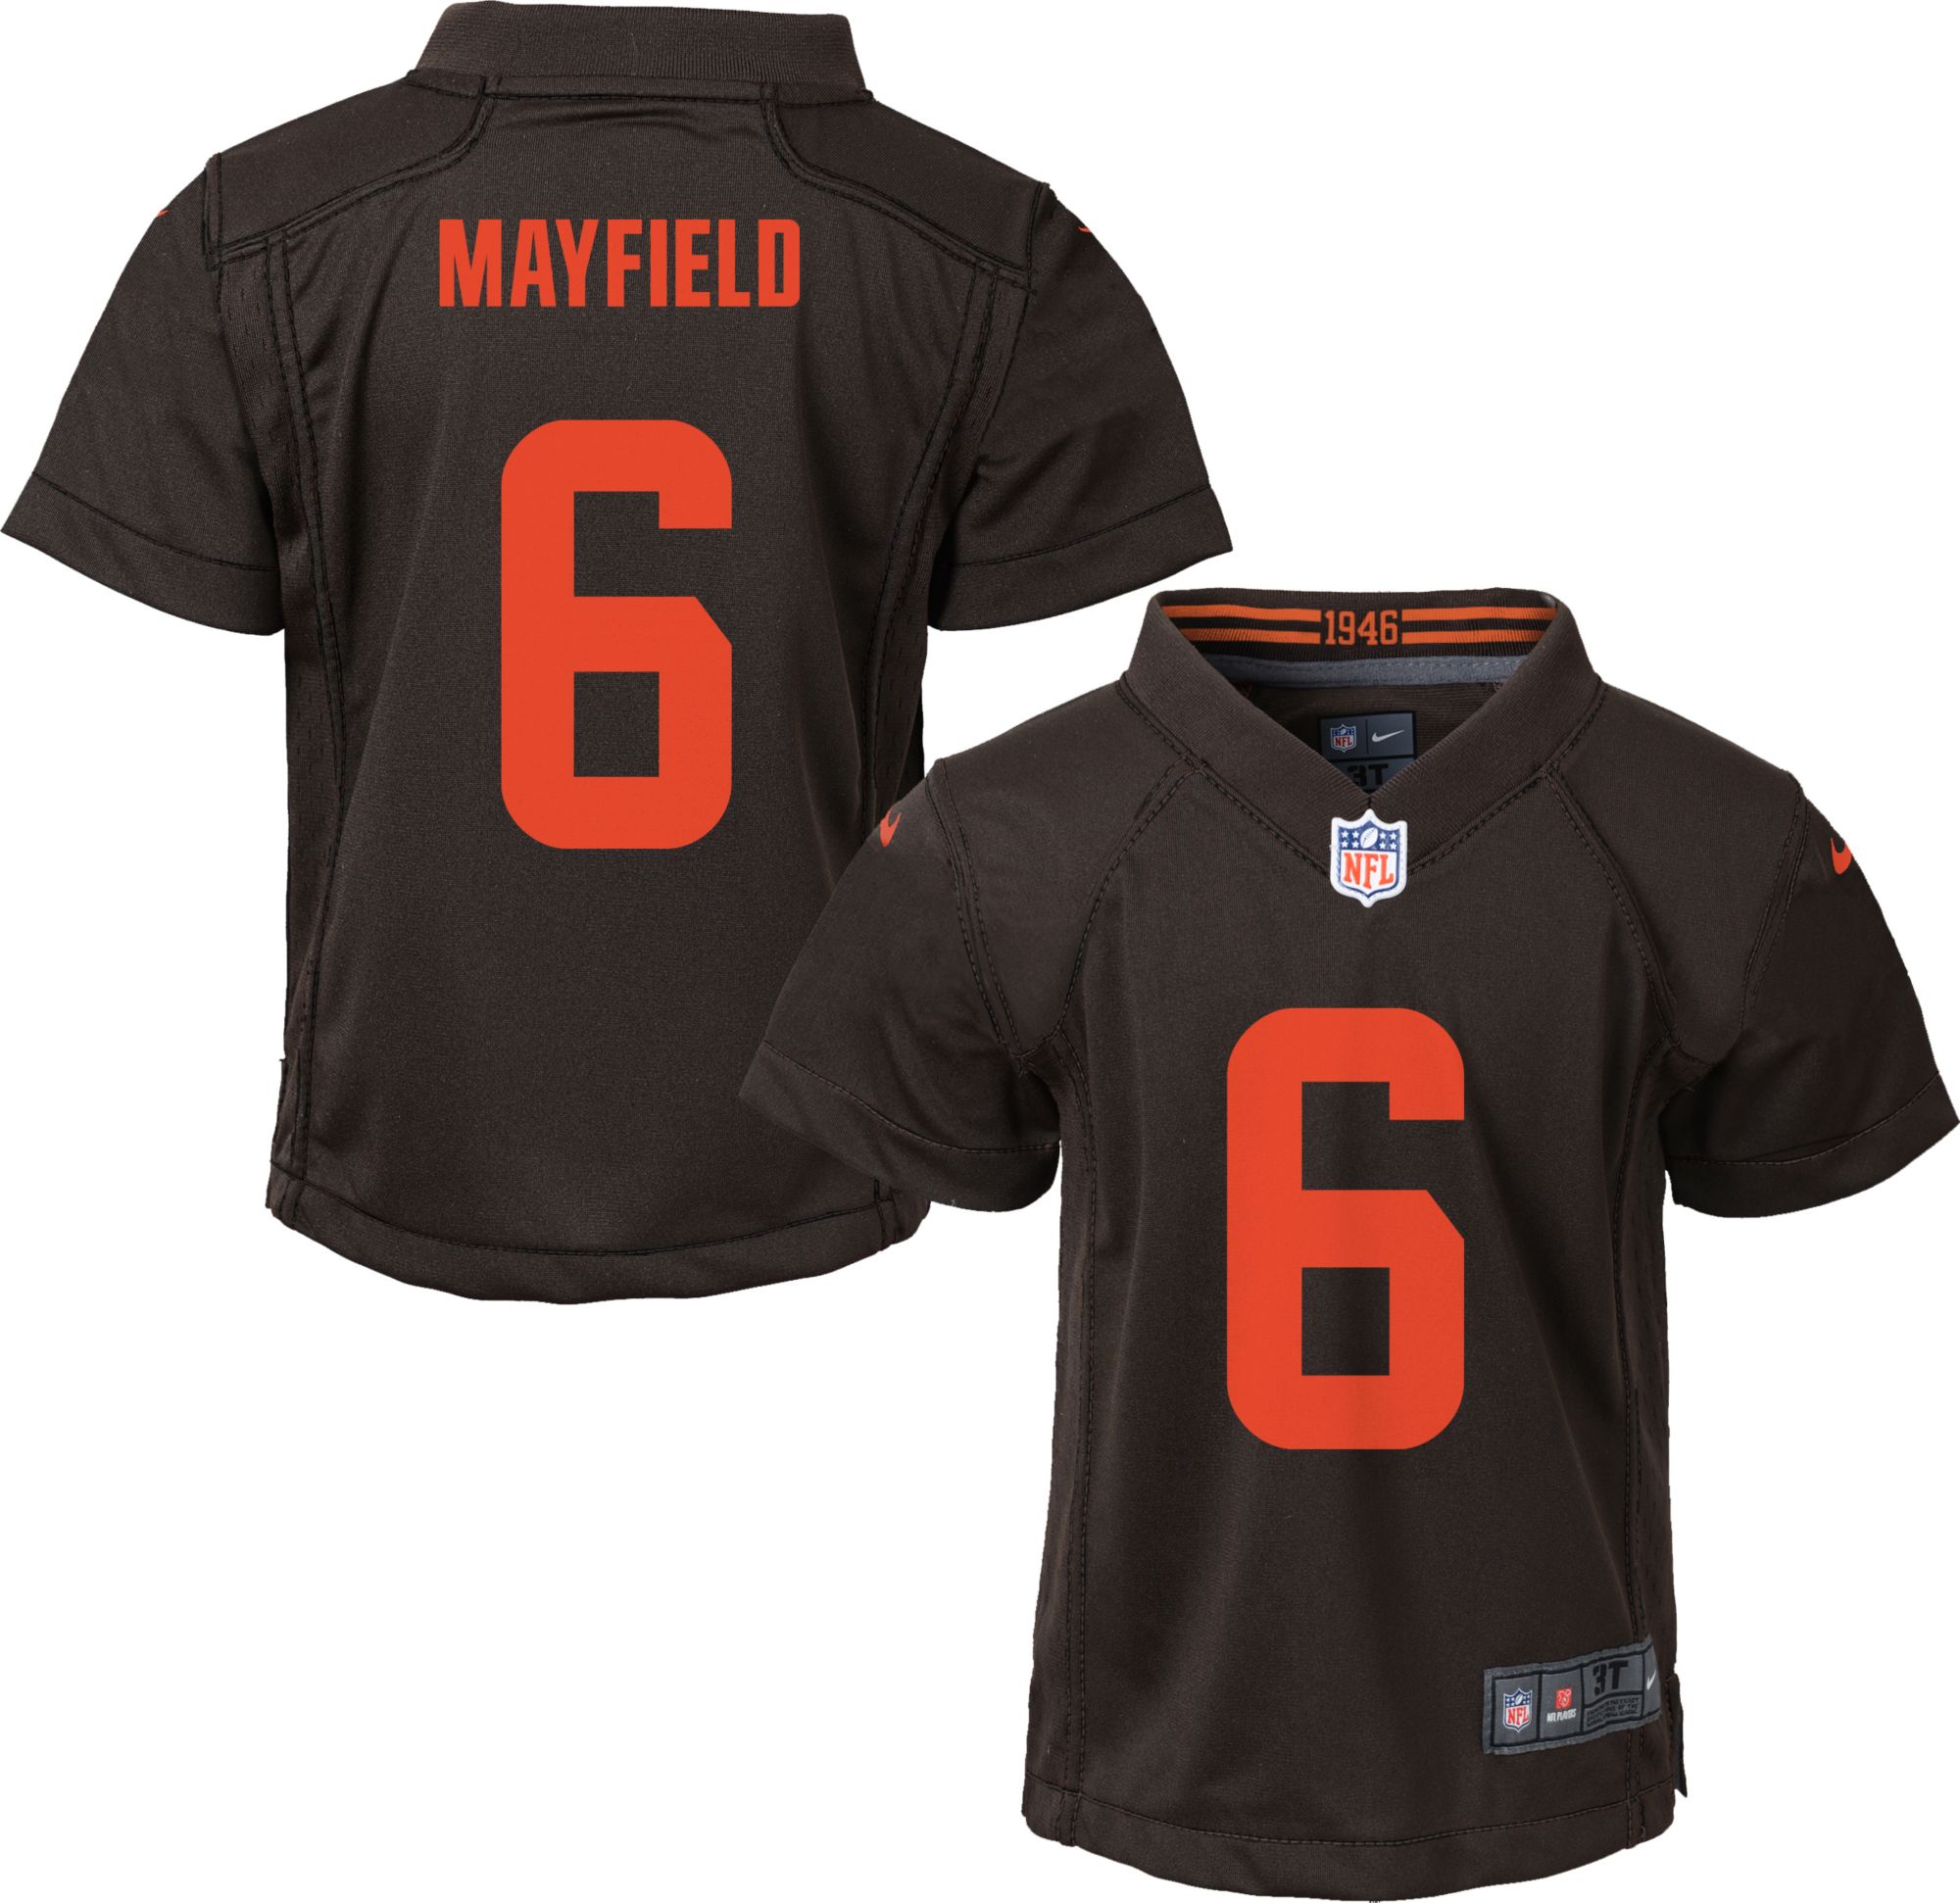 baker mayfield color rush jersey restock